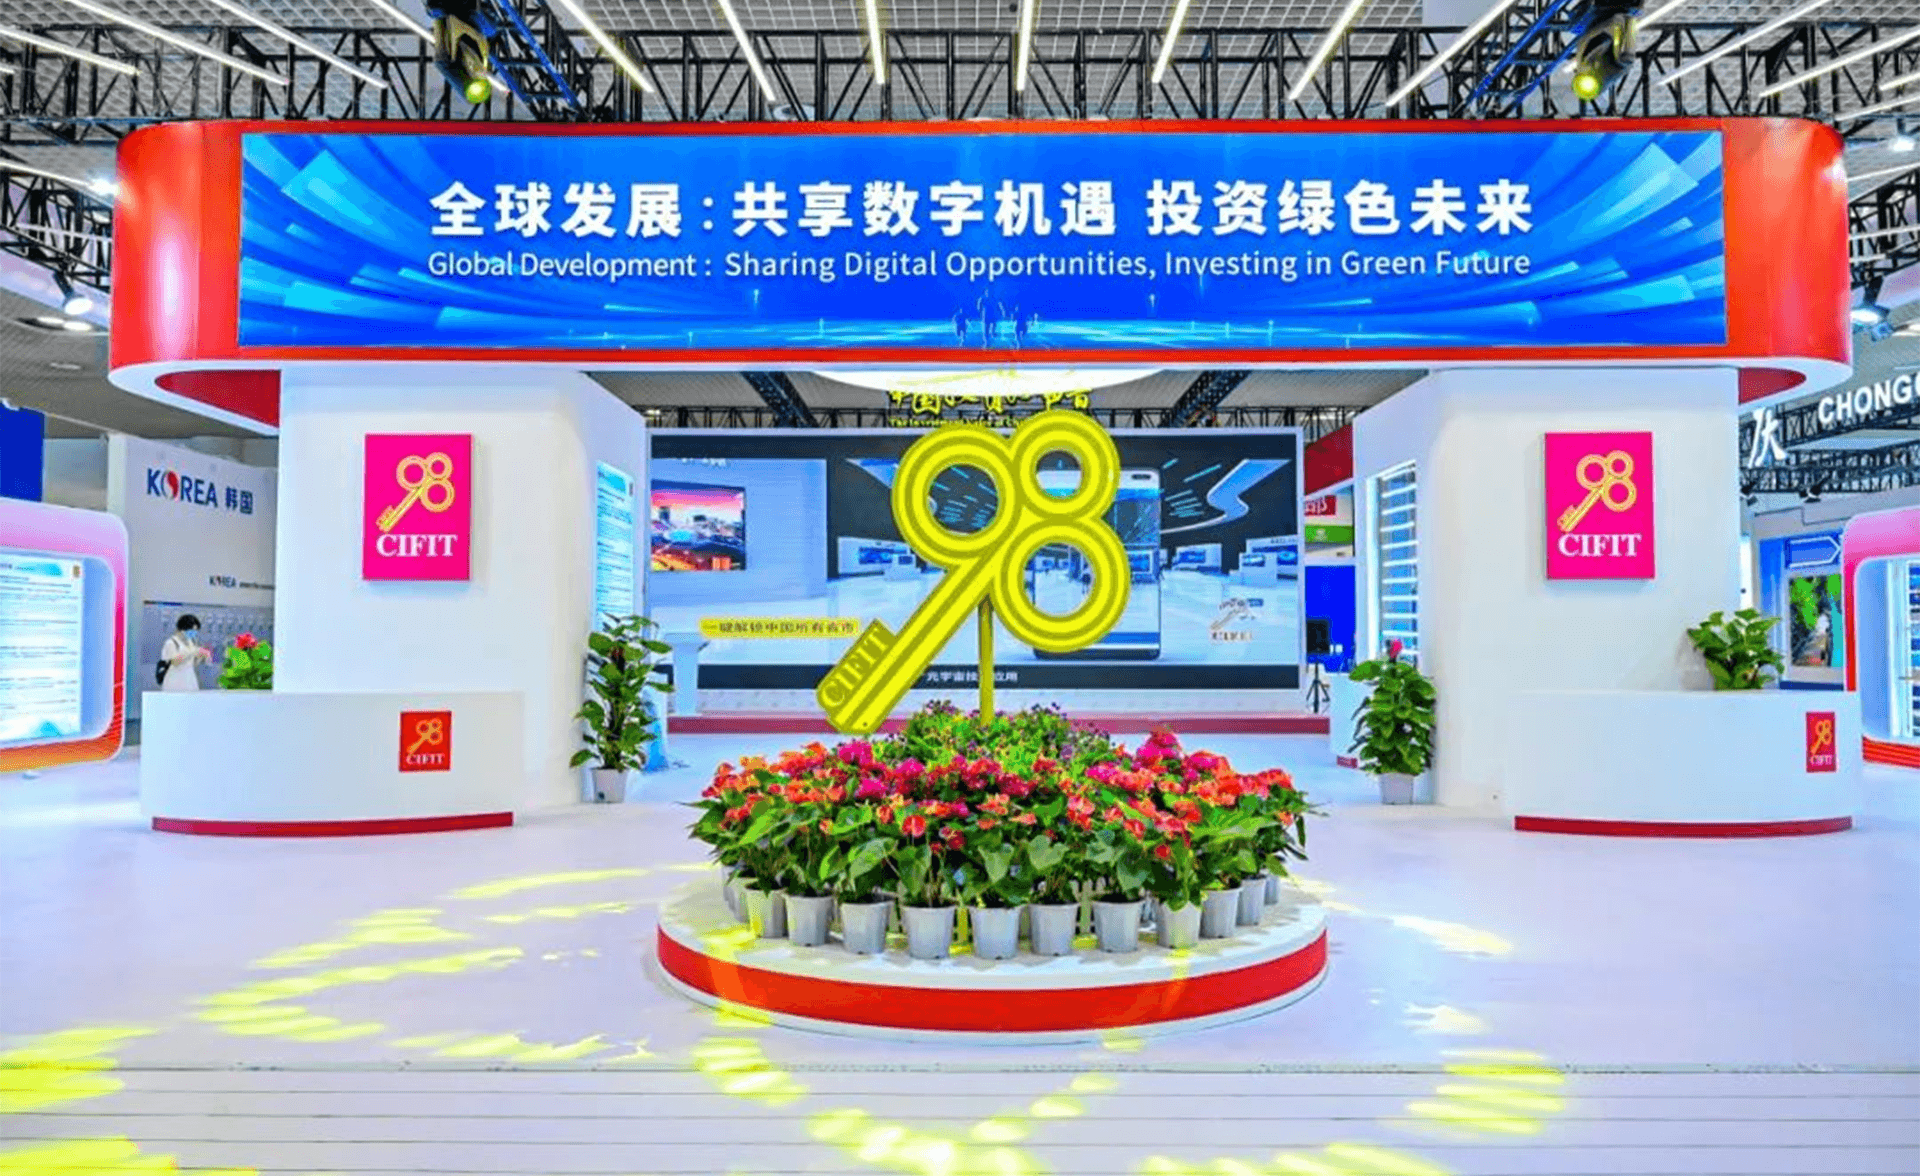 The 23rd China International Fair for Investment and Trade